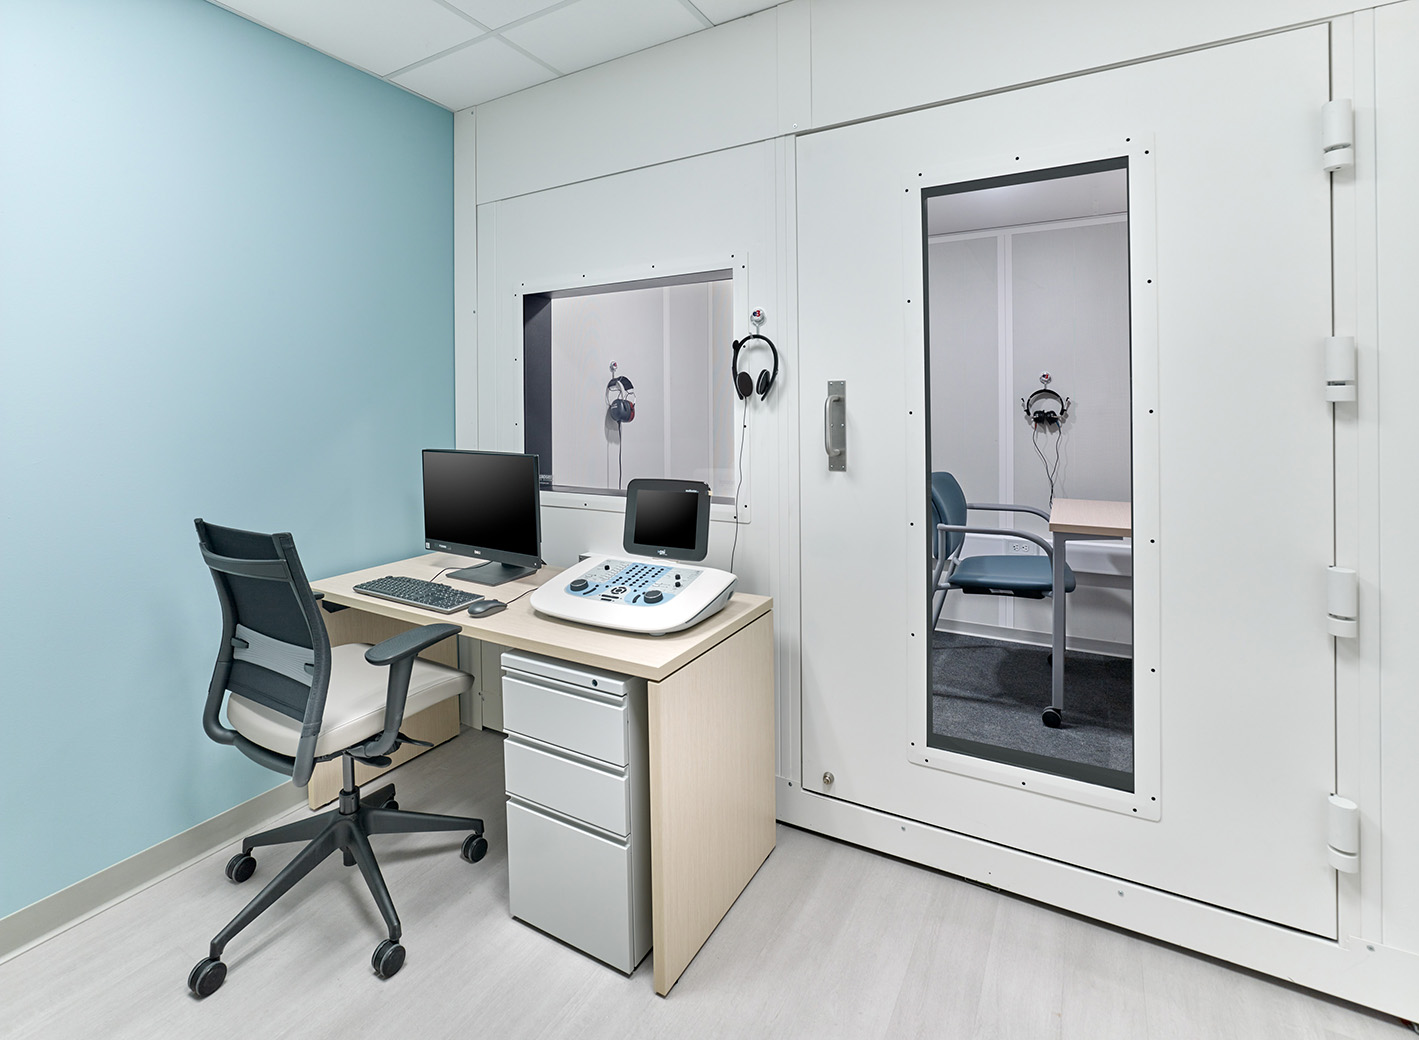 An exam room at ENT and Oral Surgery Suite at Jefferson Health featuring a computer on a desk with a chair